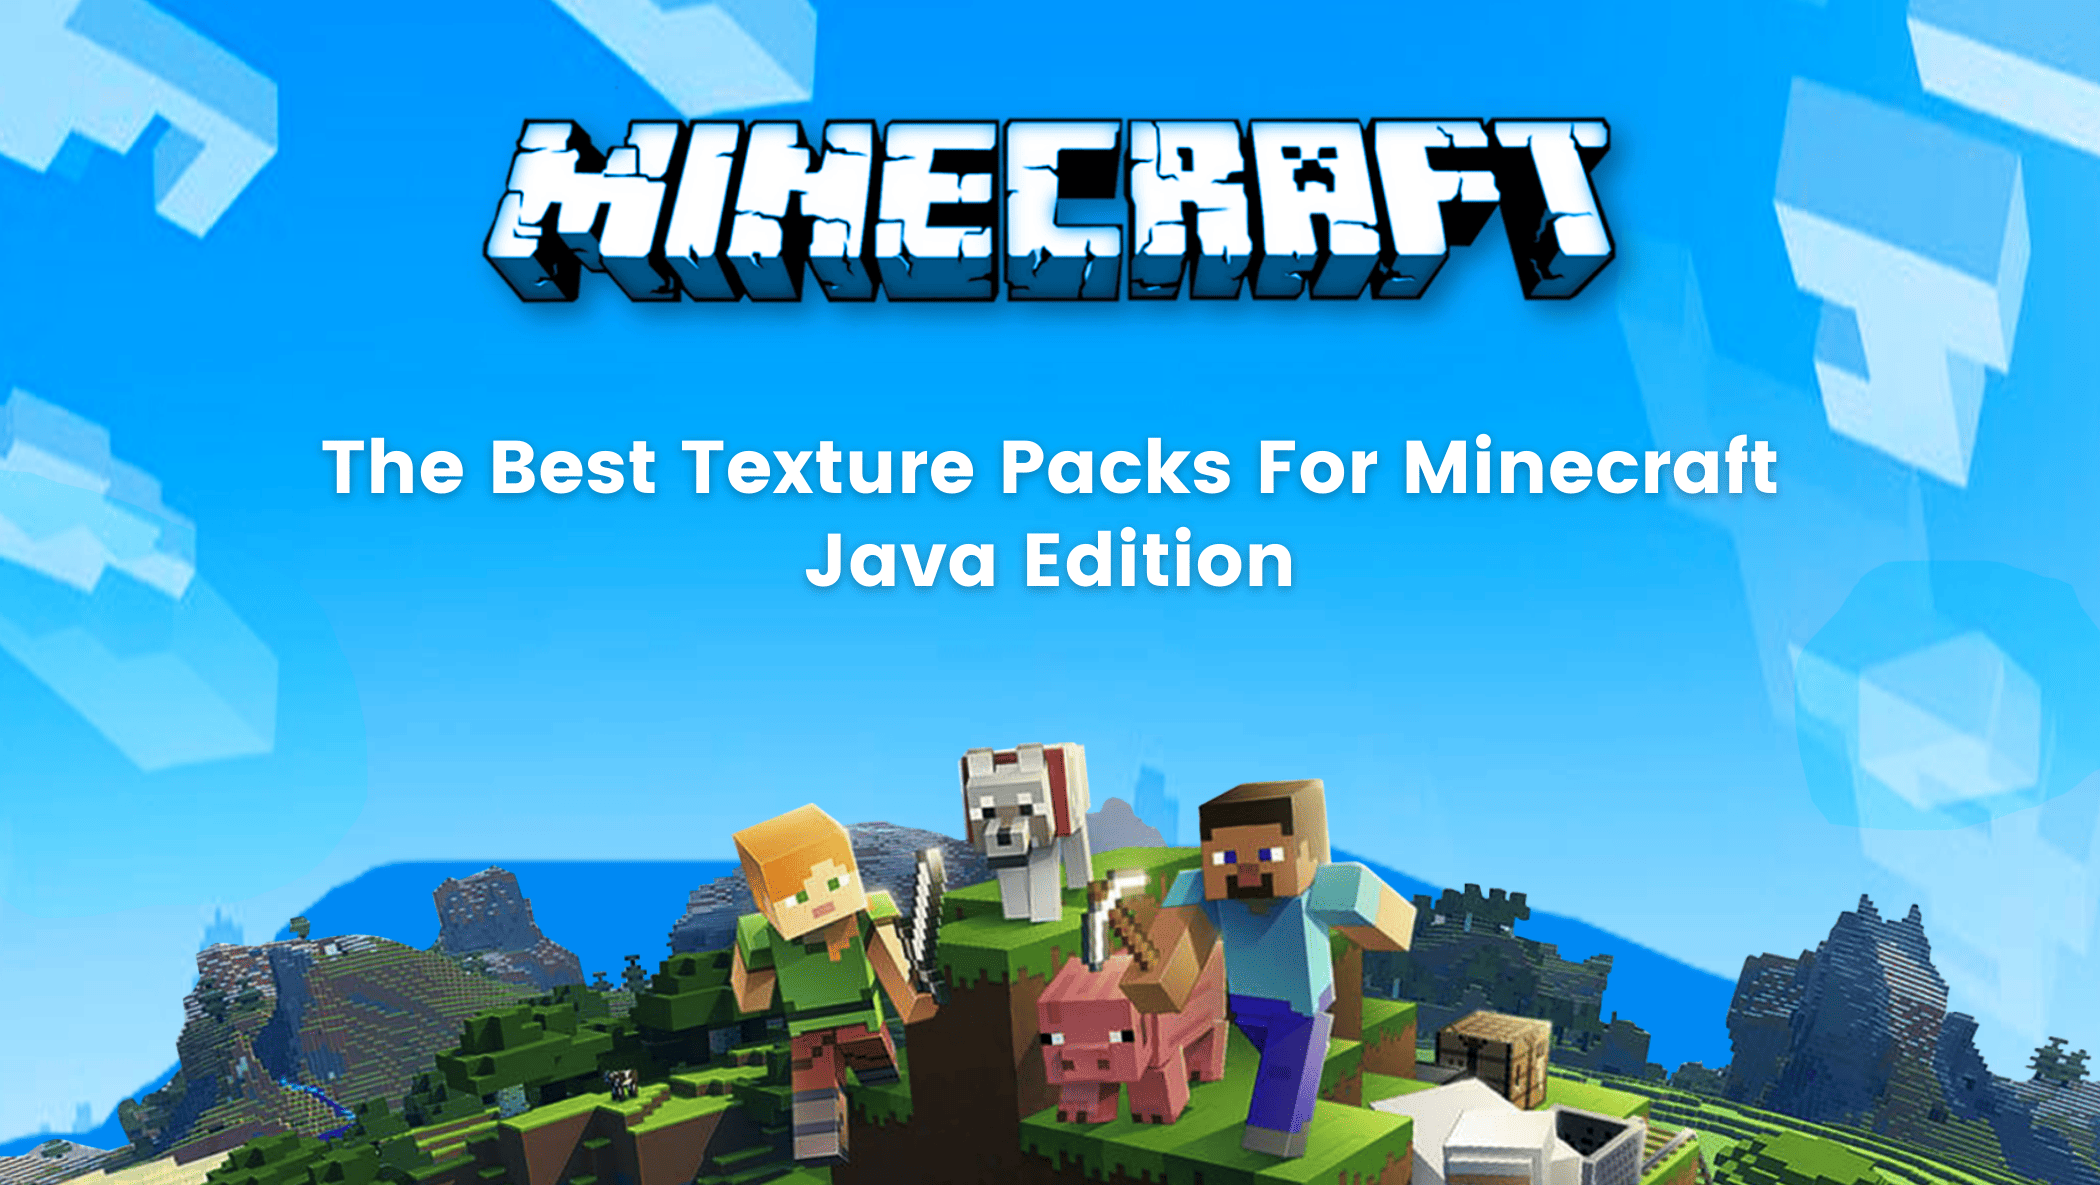 The Best Texture Packs For Minecraft Java Edition